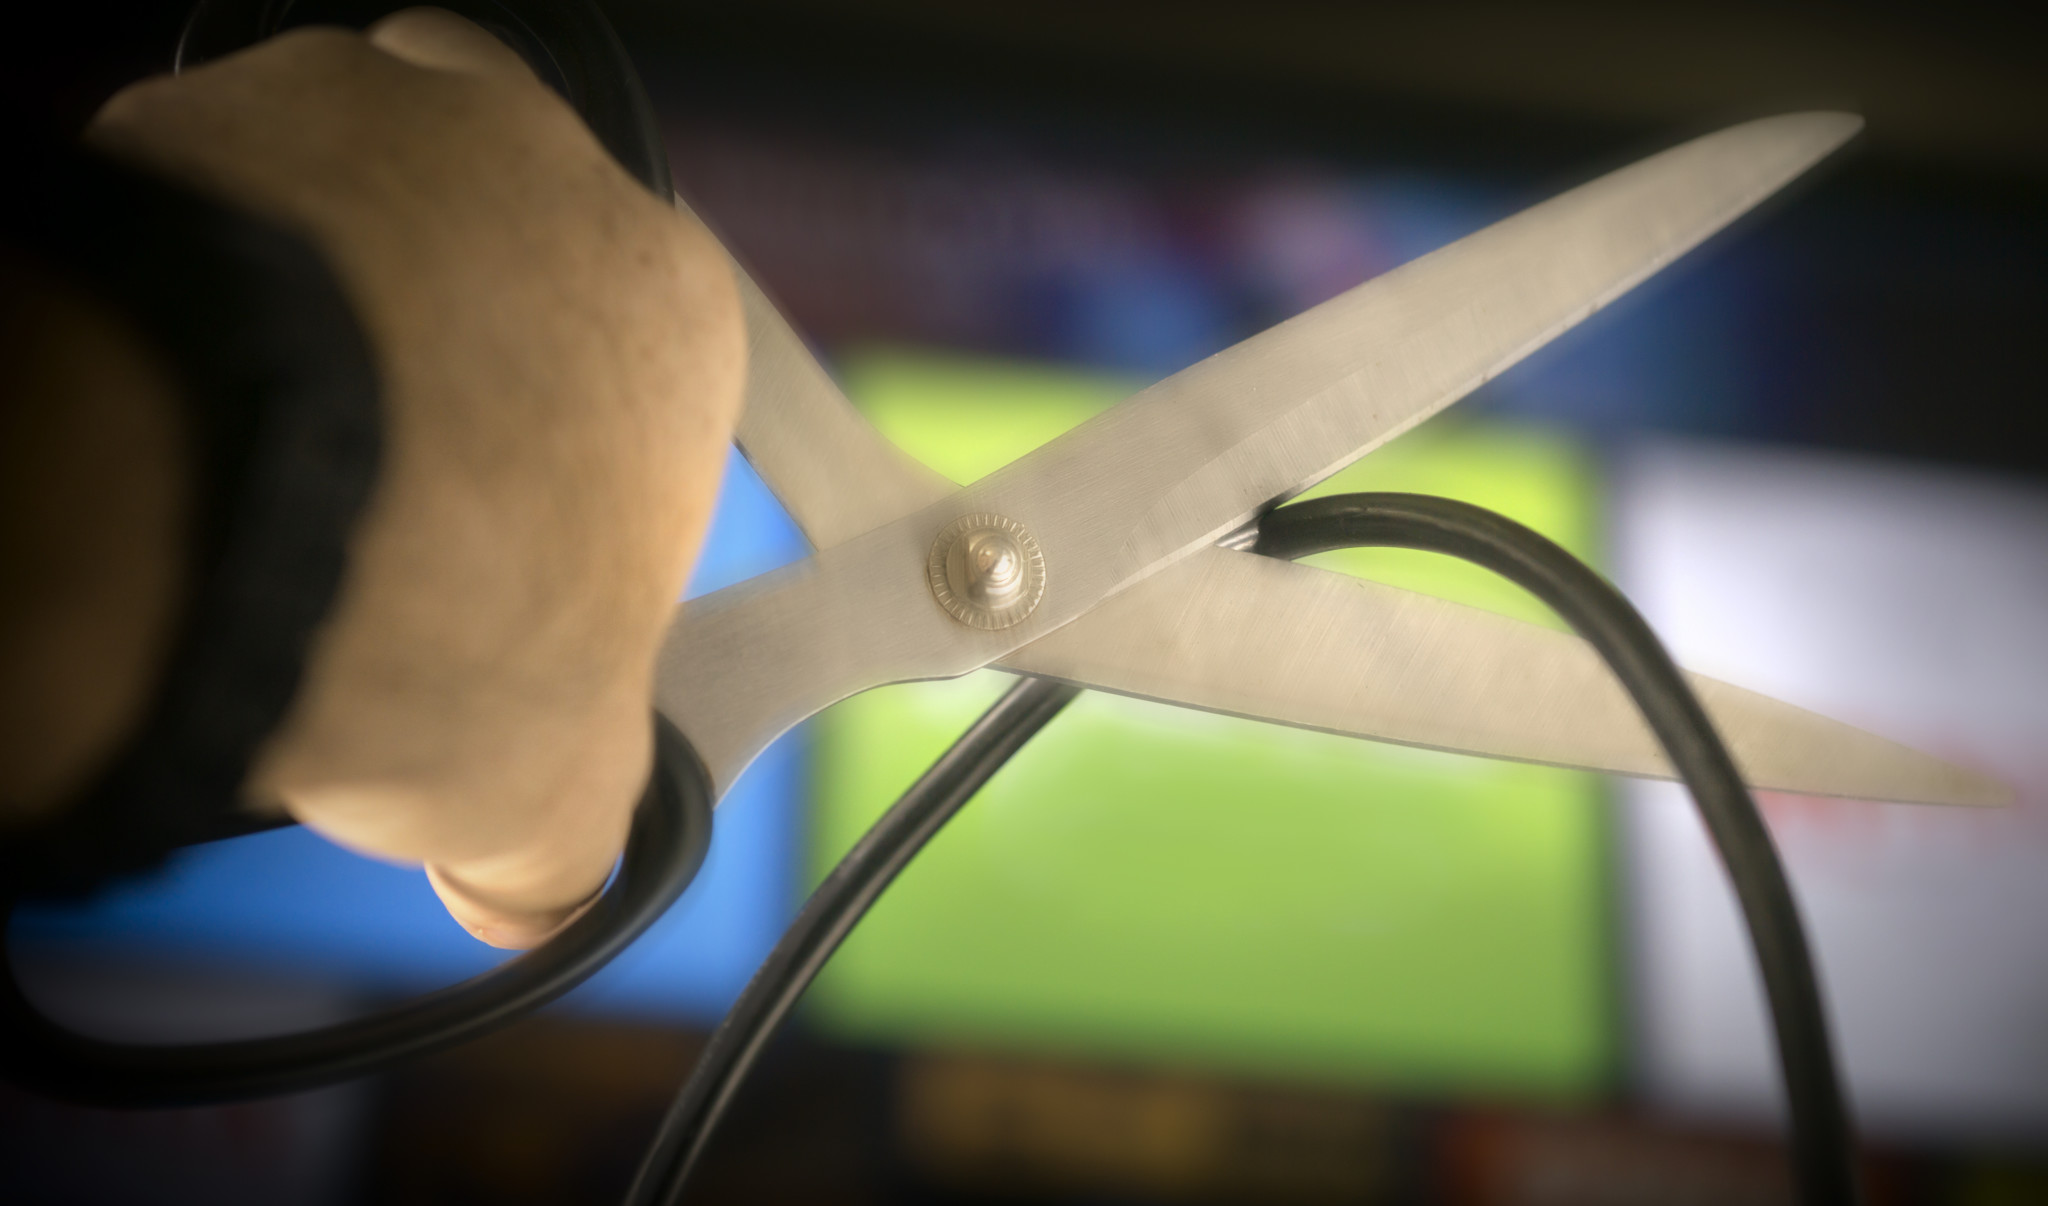 Cord Cutting This Week – AT&T Lost Almost 1 Million TV Subscribers, AT&T TV Details, & More